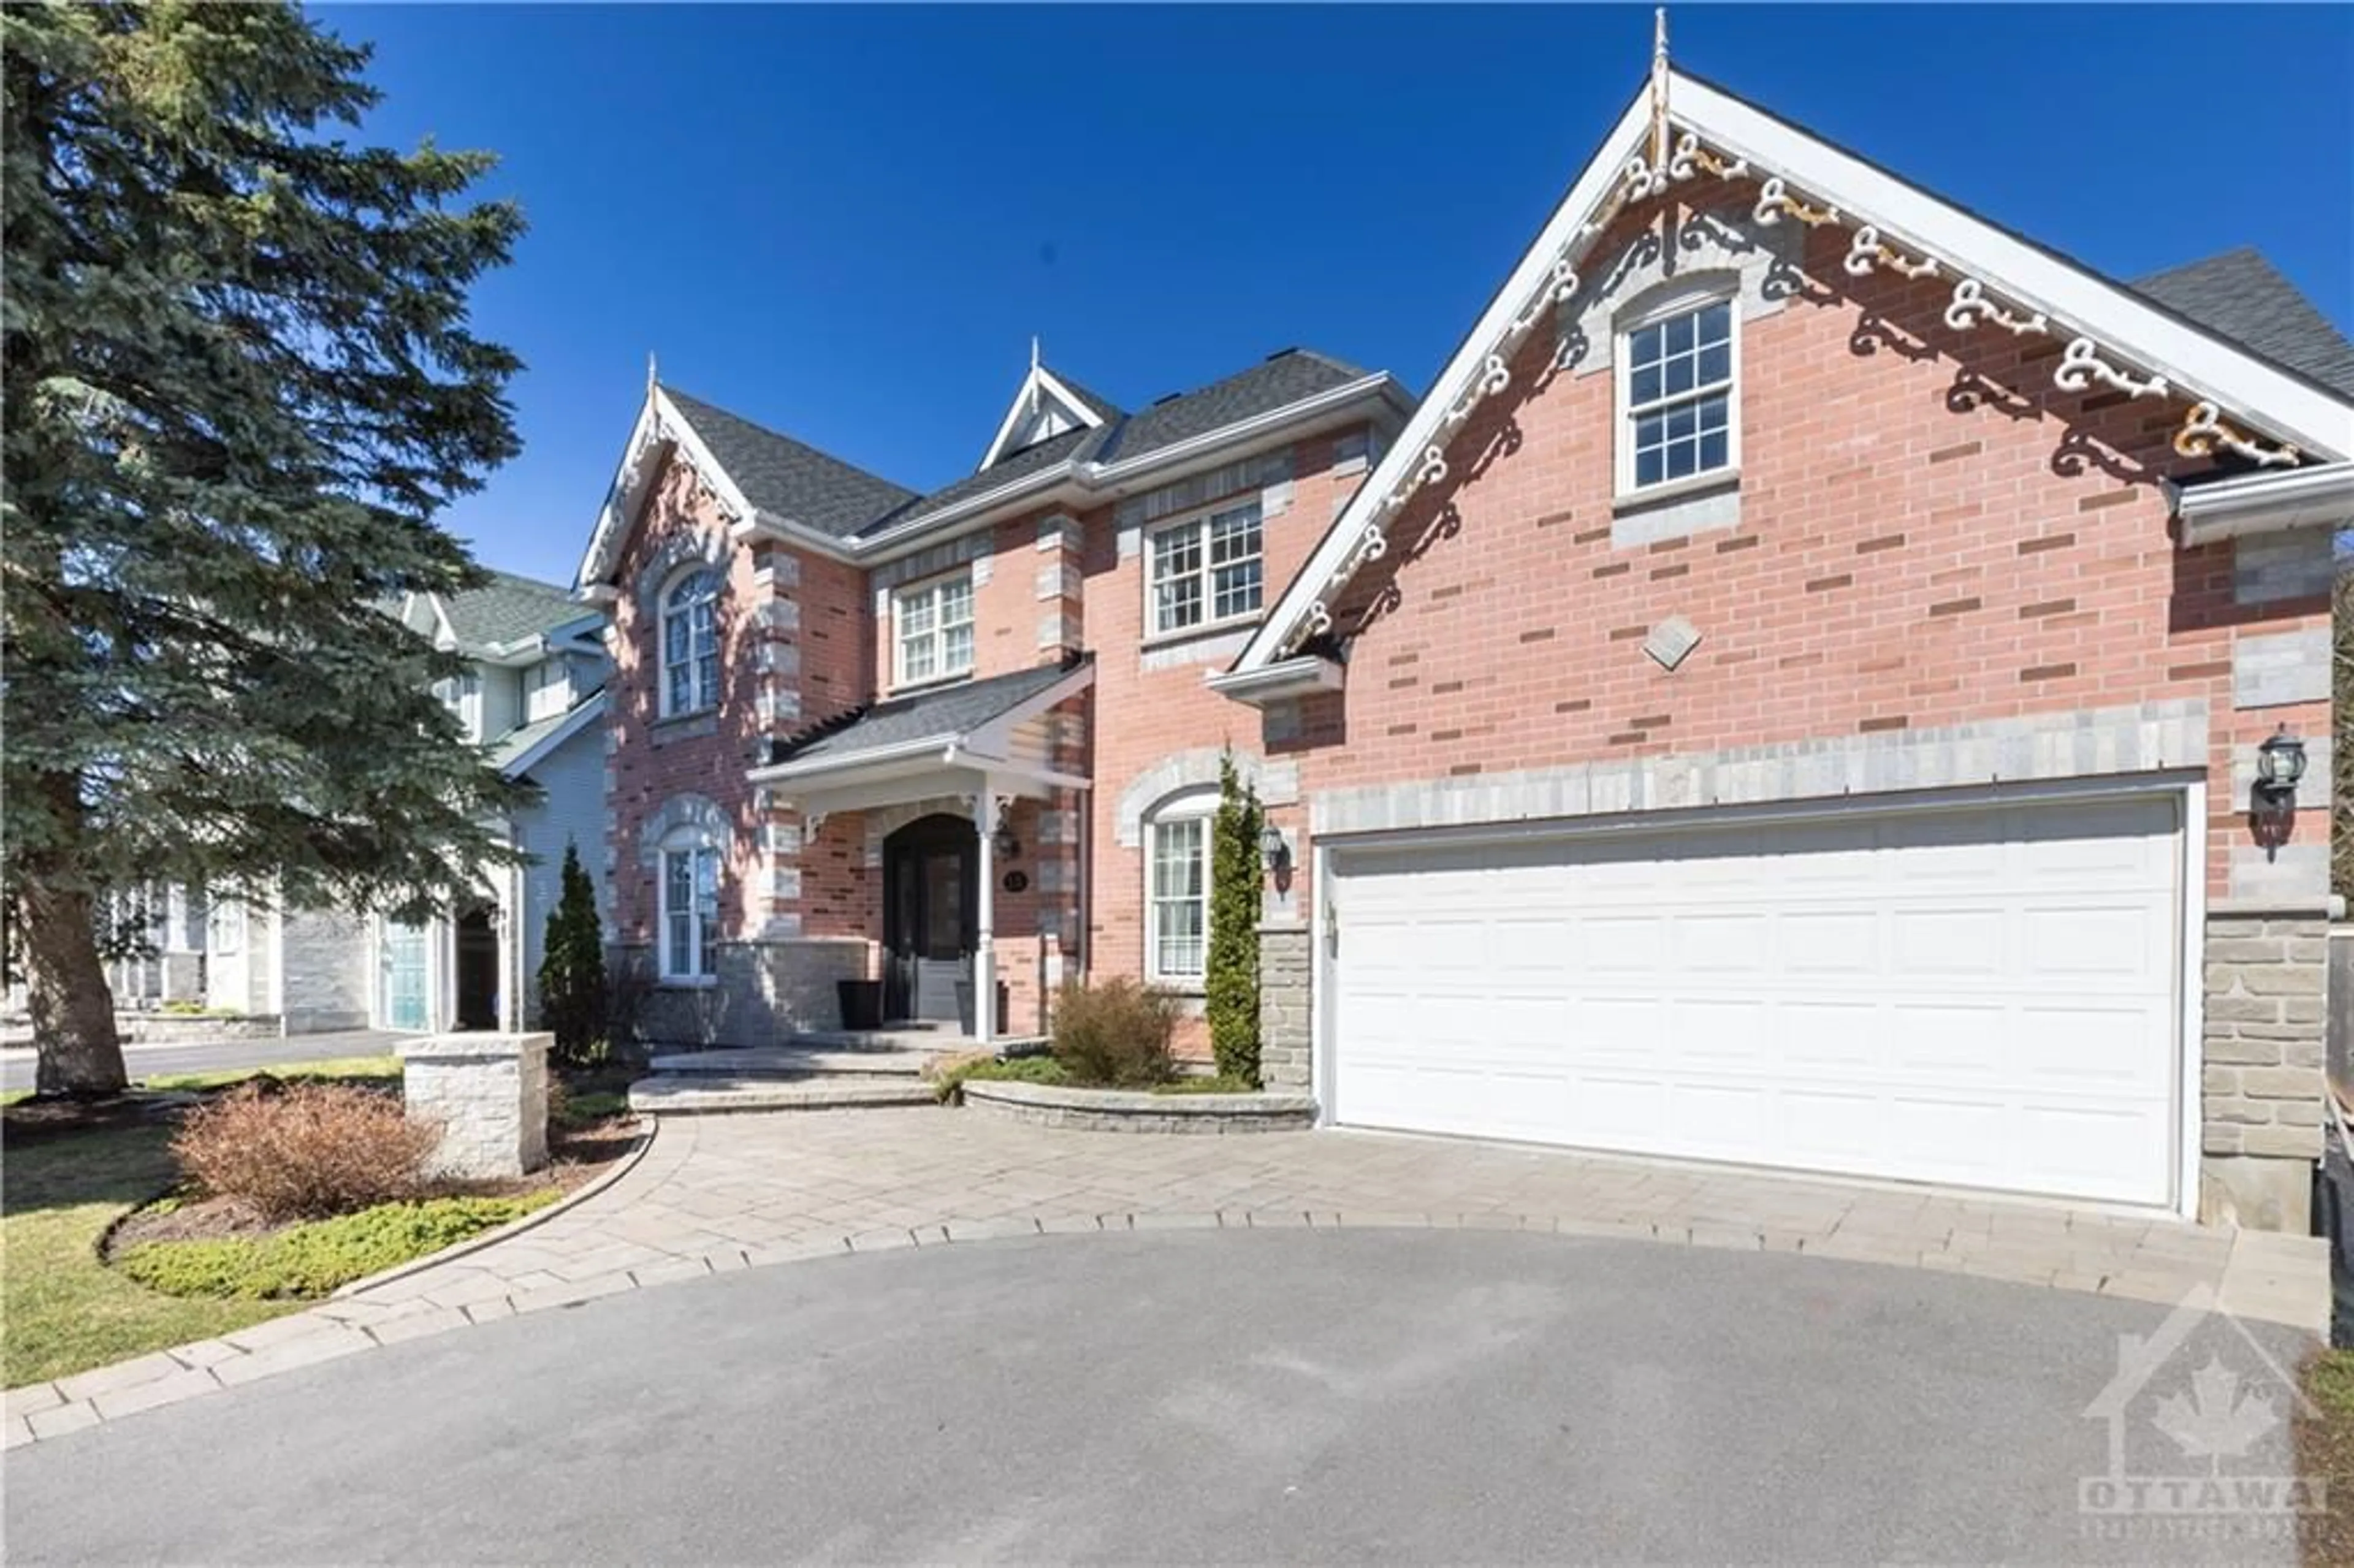 Home with brick exterior material for 53 CRANTHAM Cres, Stittsville Ontario K2S 1R2